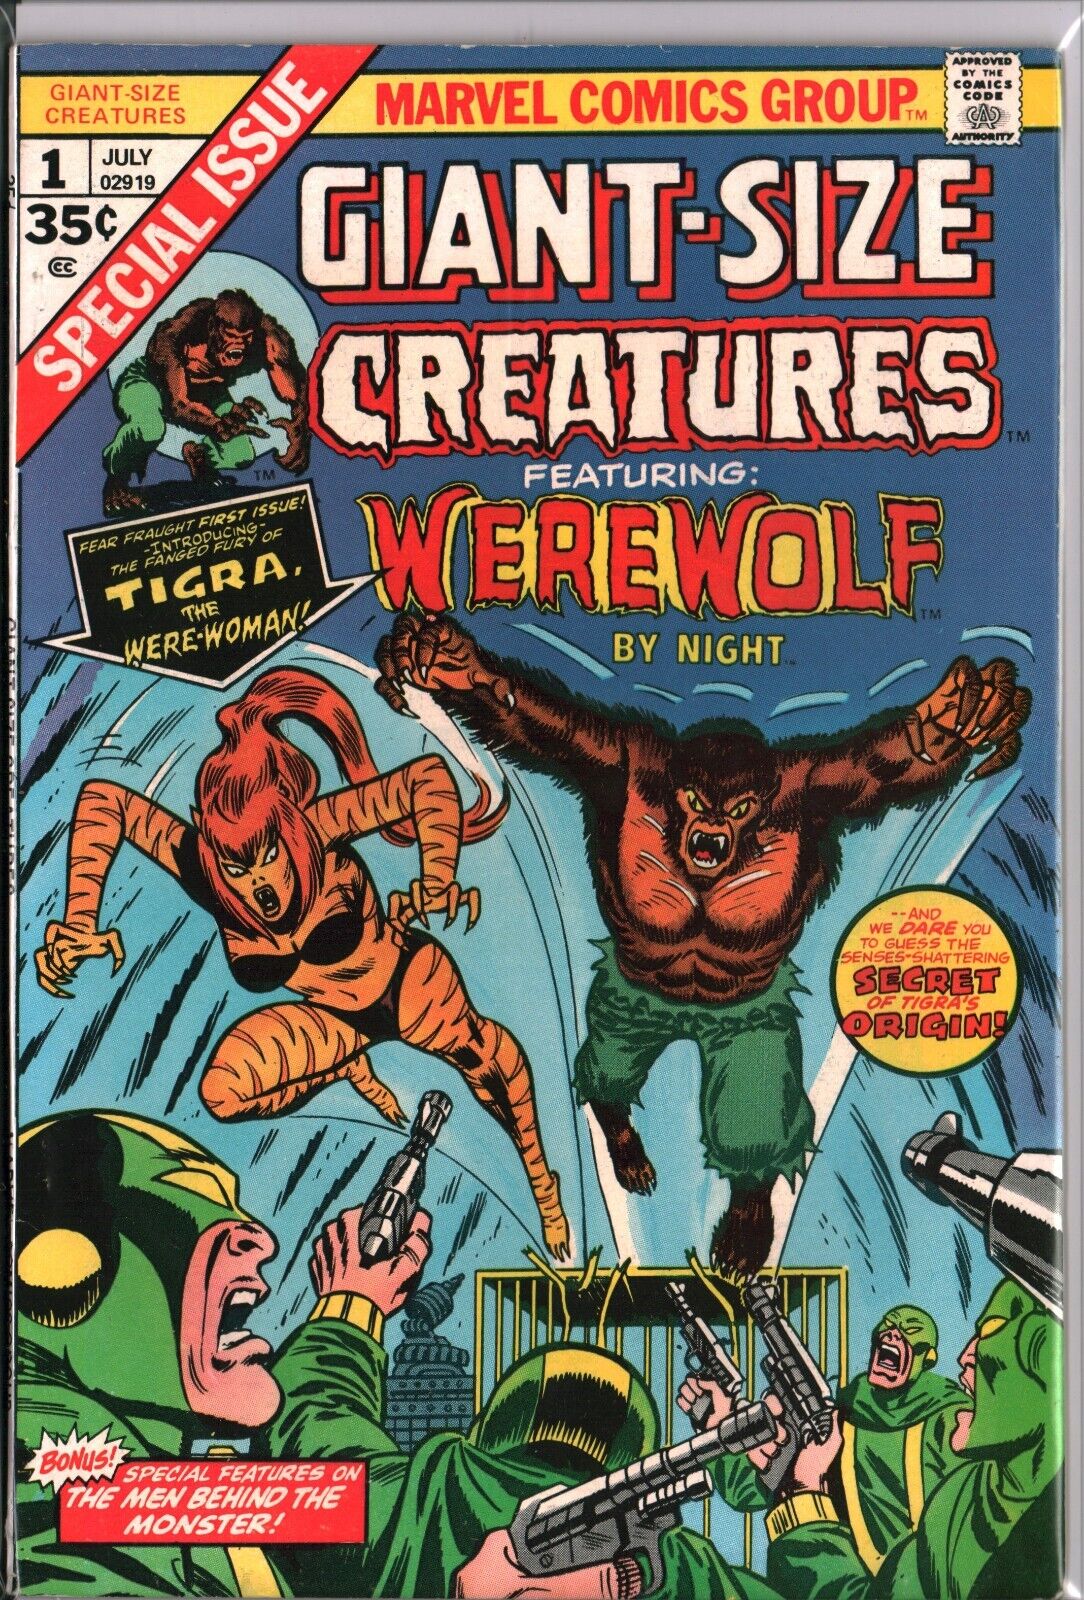 GIANT SIZE CREATURES #1 KEY 1st Appearance TIGRA (1974) Bronze VF/VF+ (8.0/8.5)